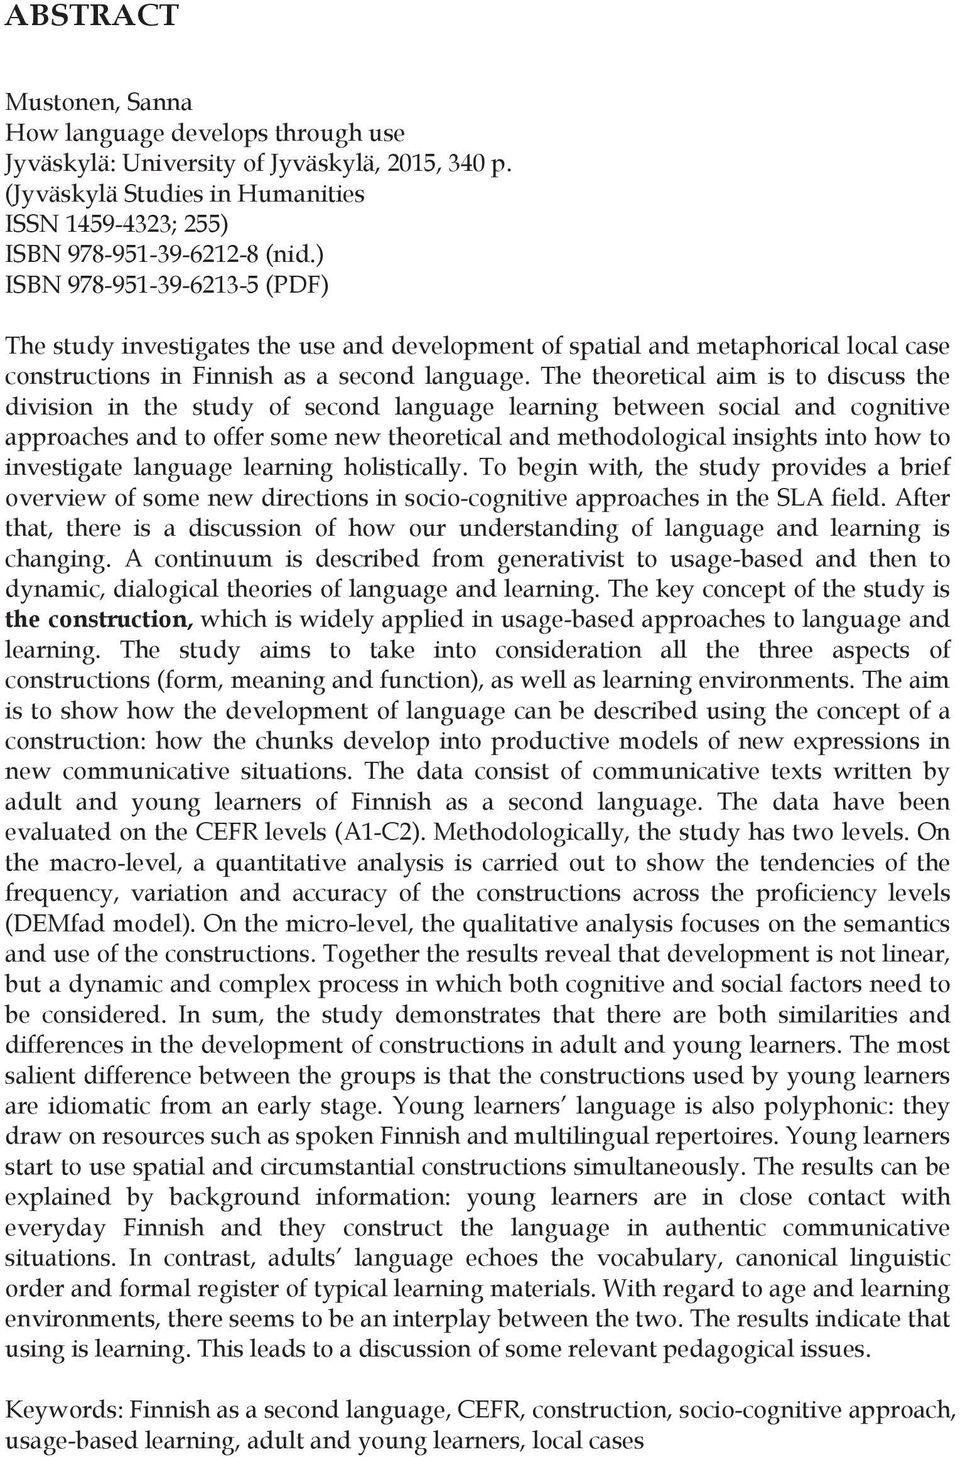 The theoretical aim is to discuss the division in the study of second language learning between social and cognitive approaches and to offer some new theoretical and methodological insights into how